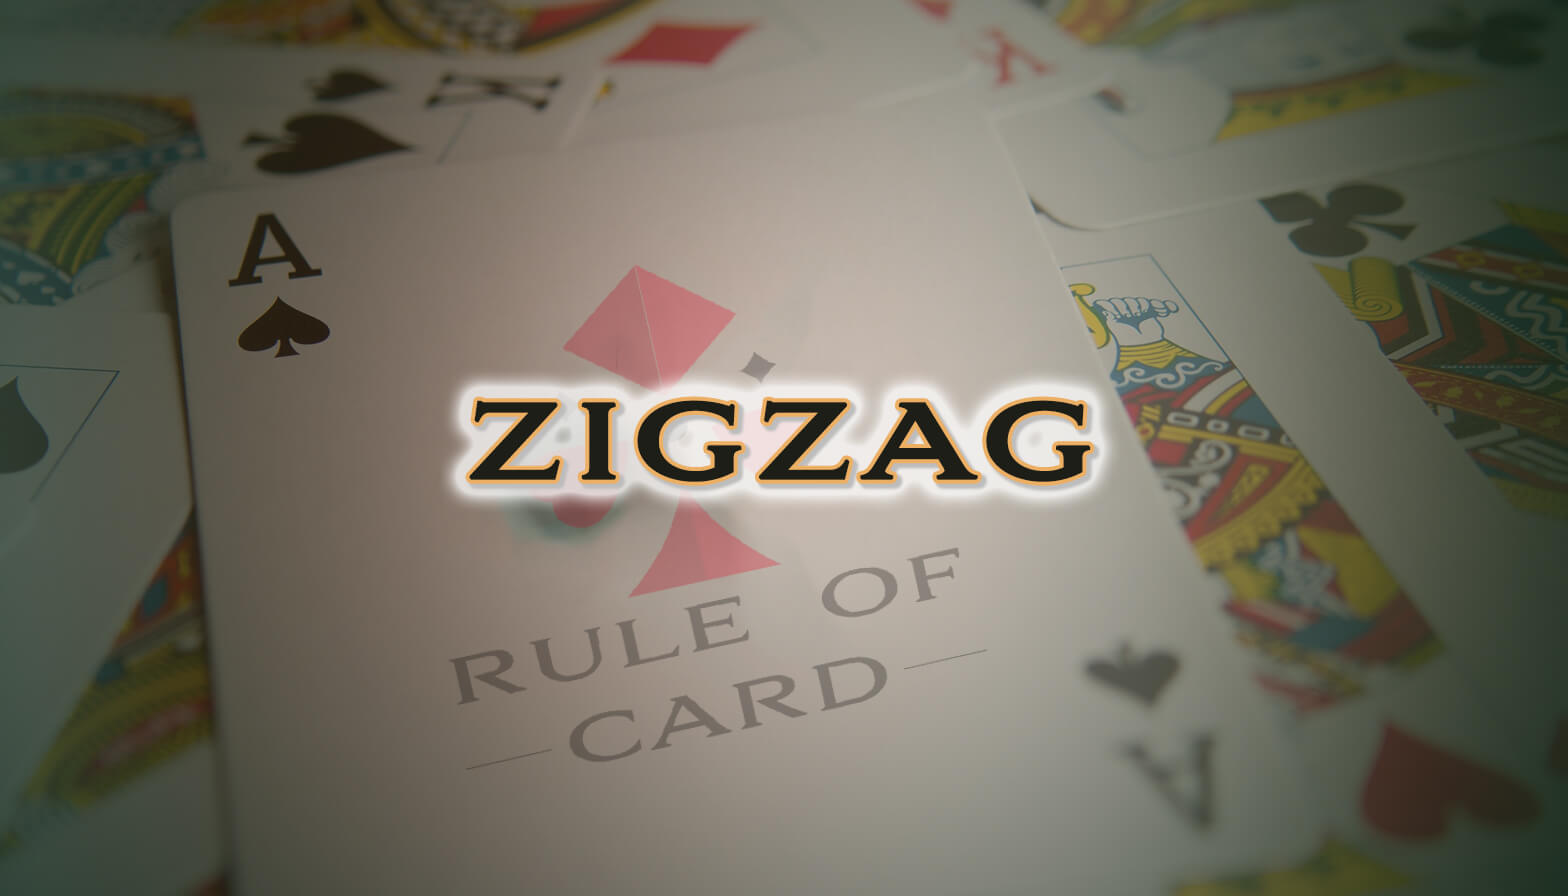 Playing the card game Zigzag